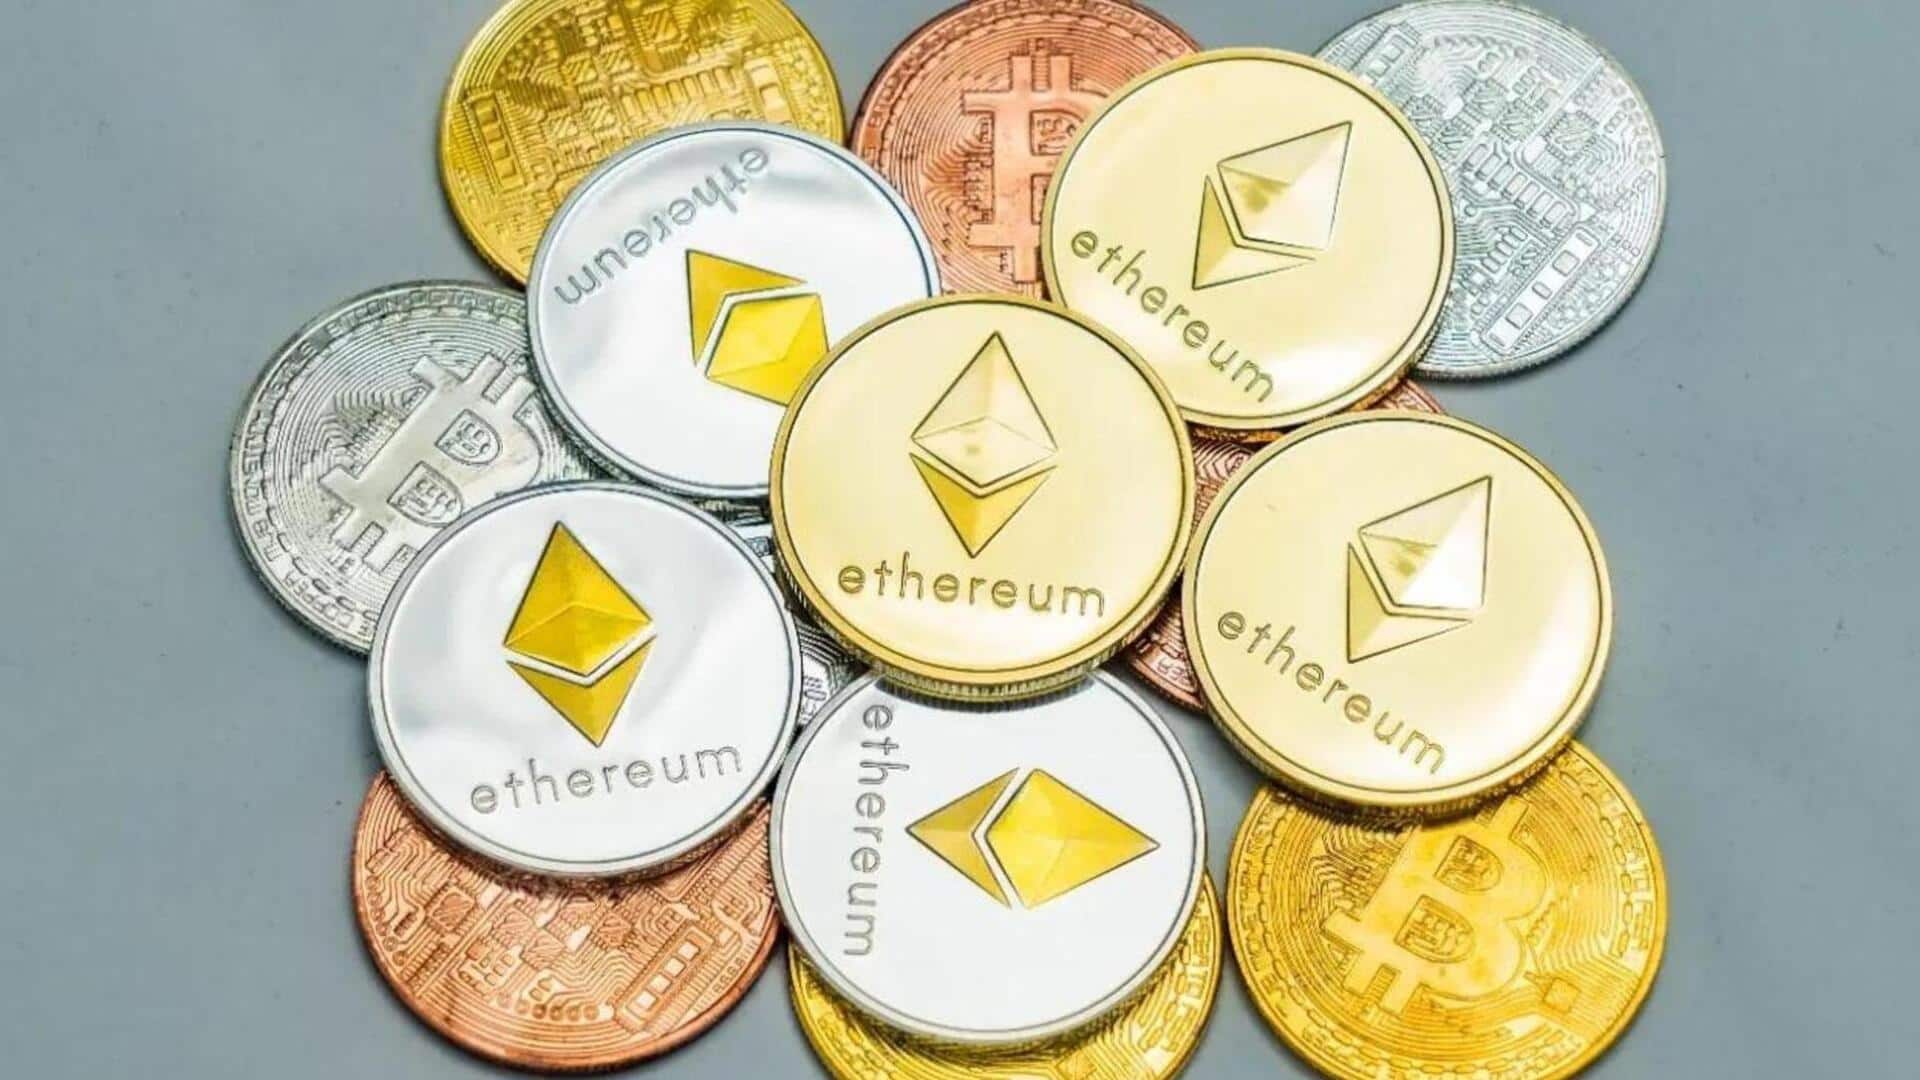 Cryptocurrency prices: Check today's rates of Bitcoin, Ethereum, XRP, Tether